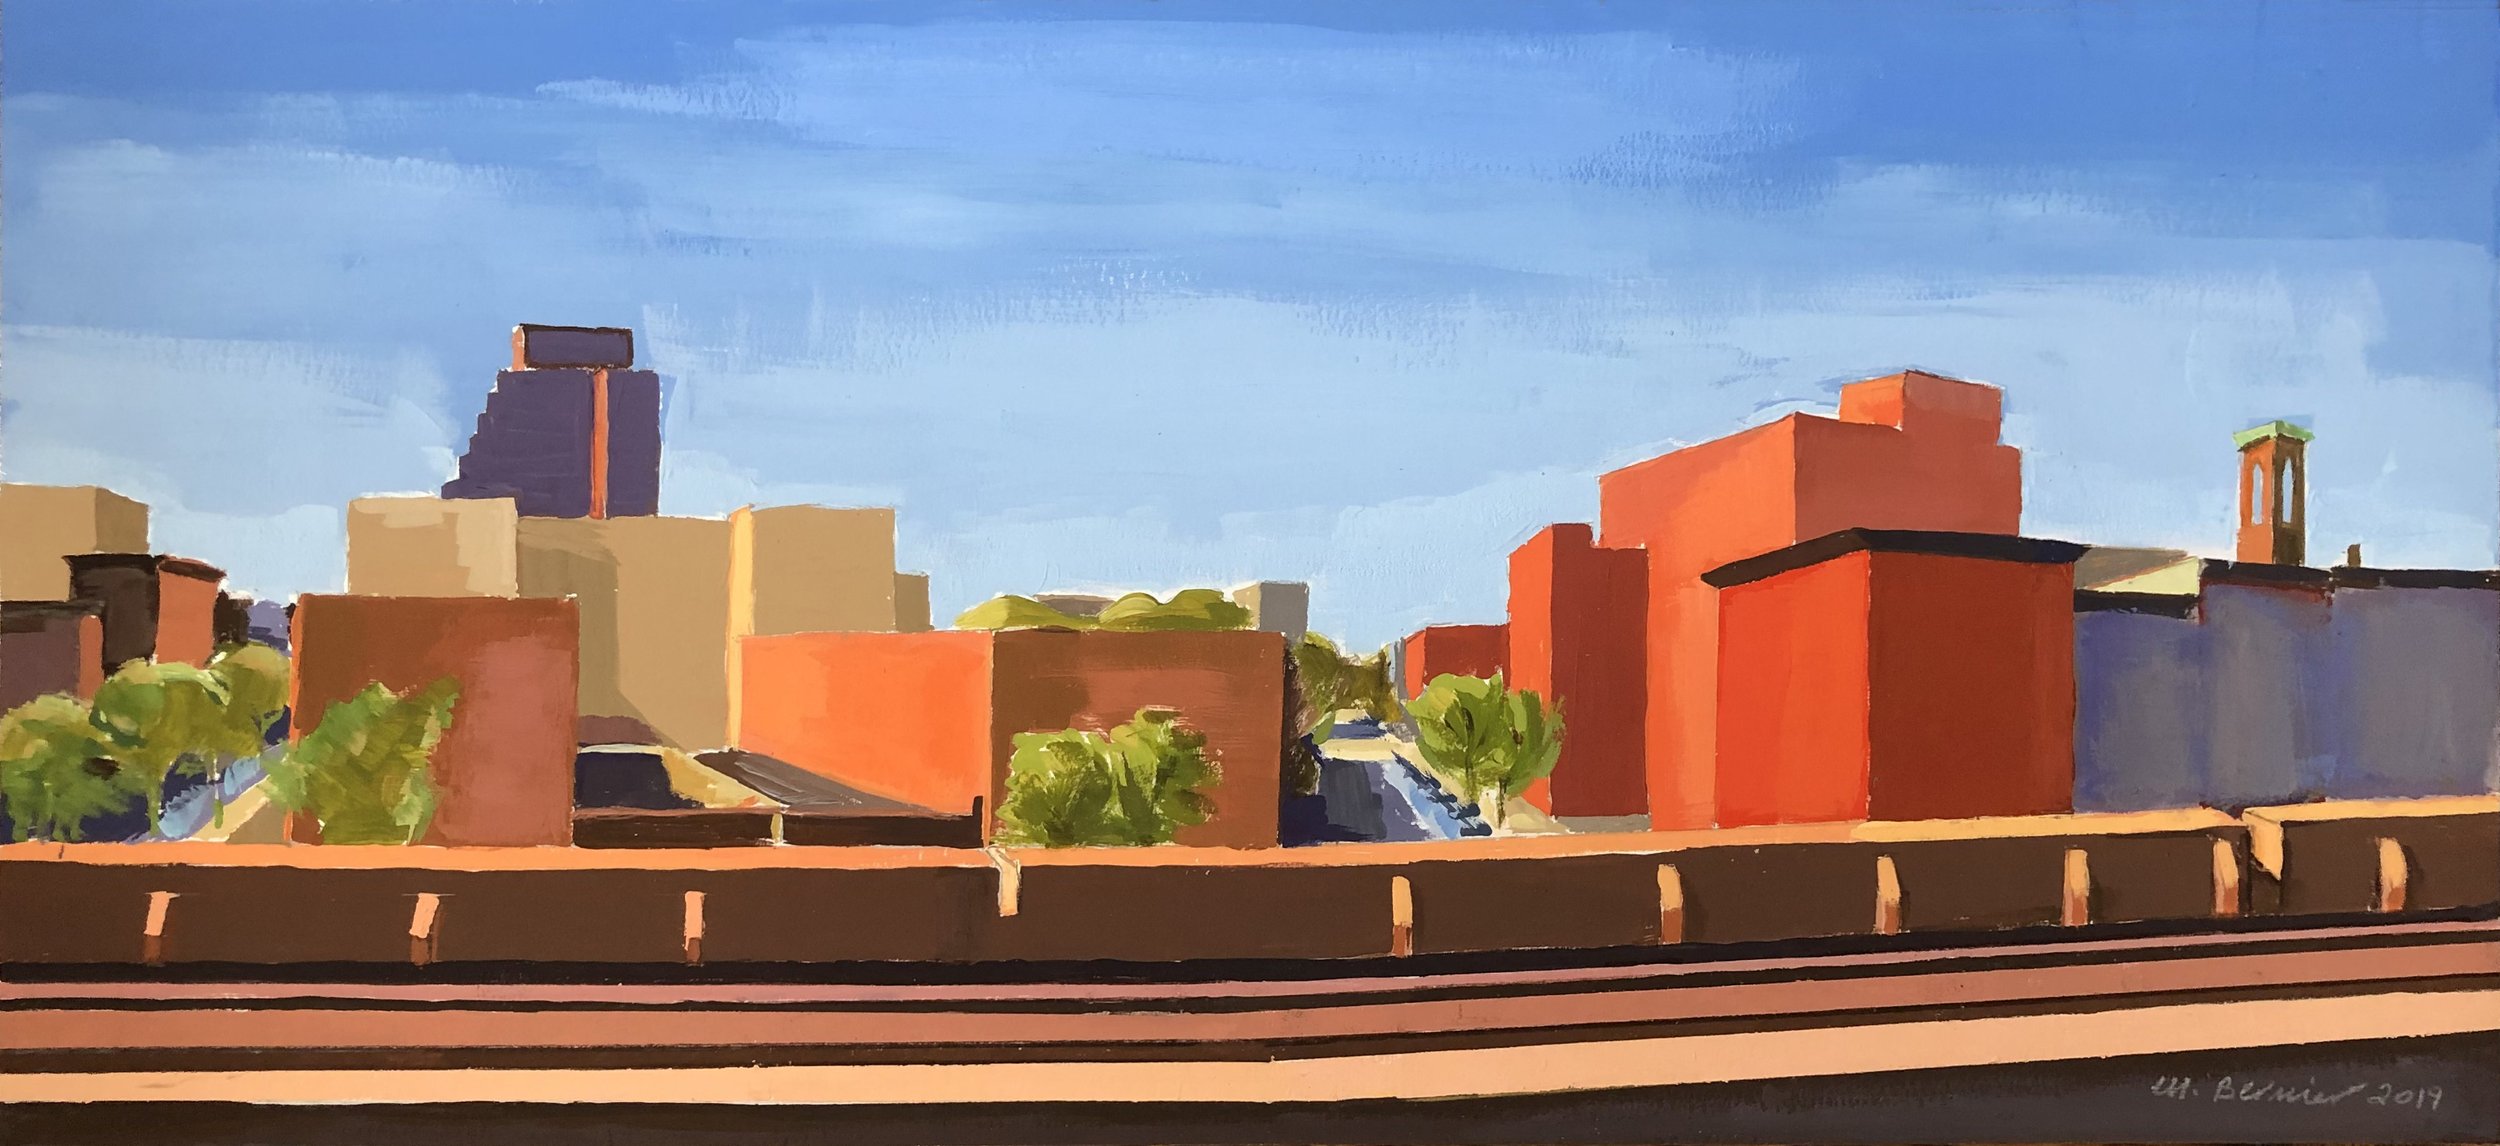    East Harlem From the Train V,   gouache, 9 3/4 x 21 in, 2019   